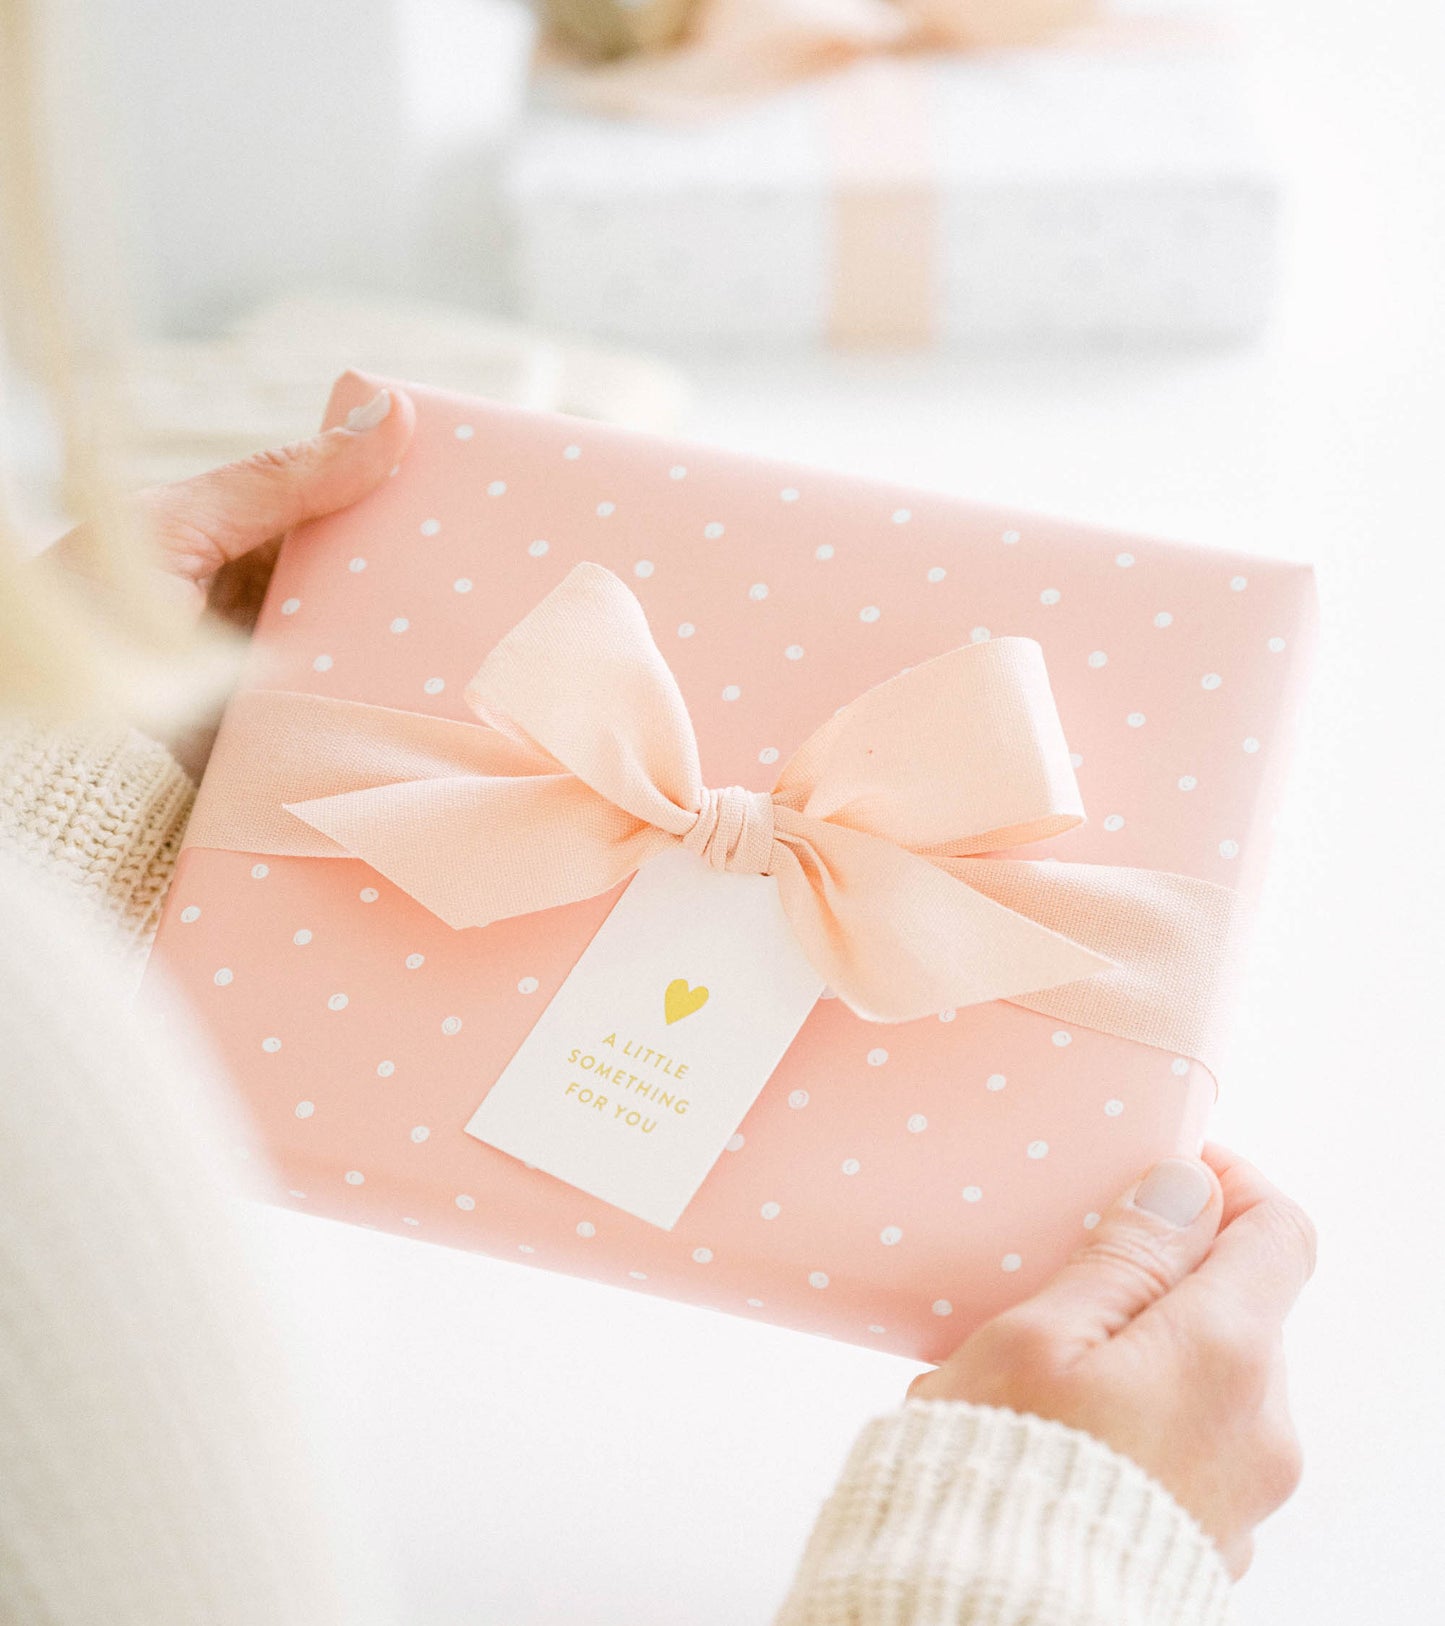 person holding gift wrapped in rose dot gift wrap with pale pink bow, and white gift tag printed with gold foil "a little something for you" with gold heart